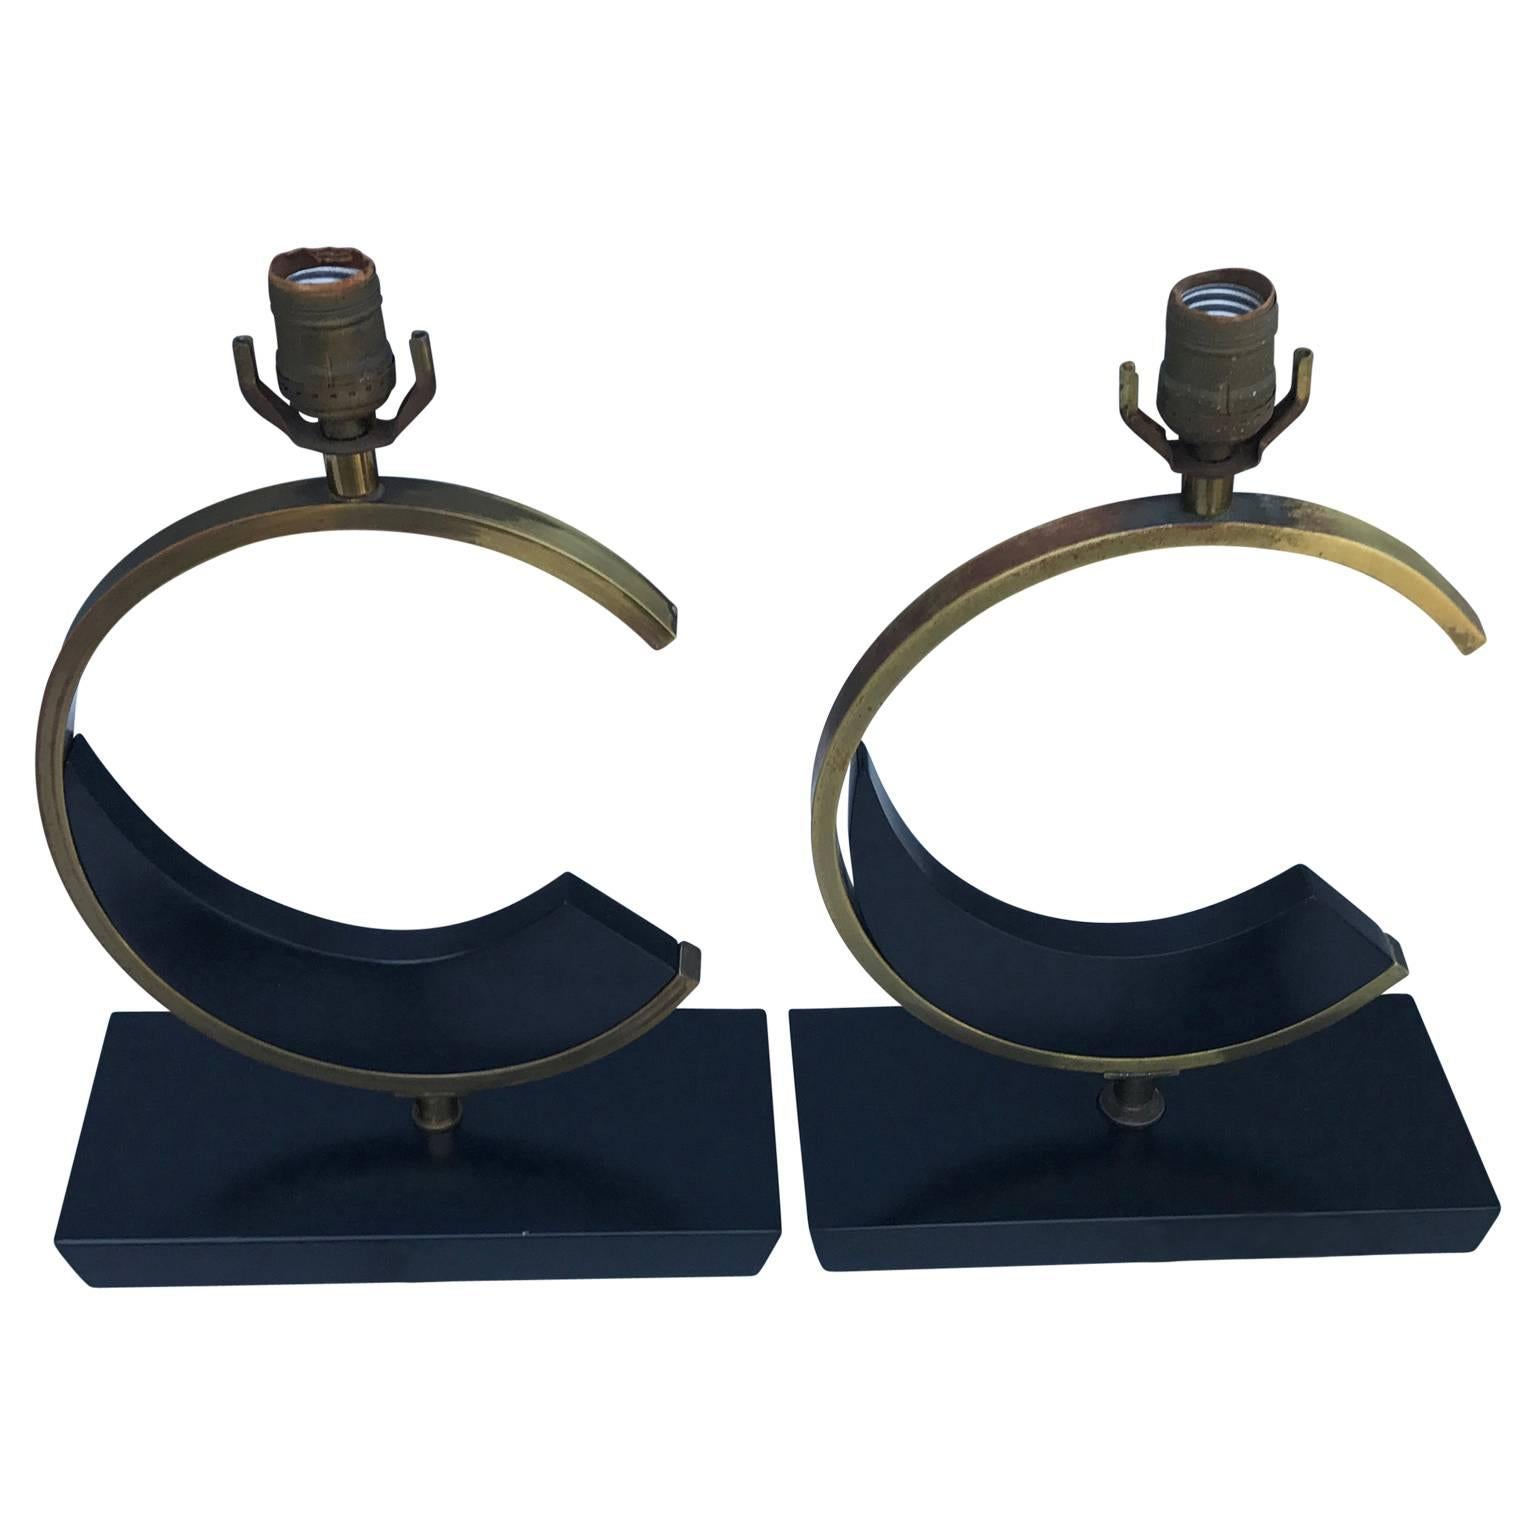 Painted Pair of Mid-Century Modern C-Shaped Table Lamps